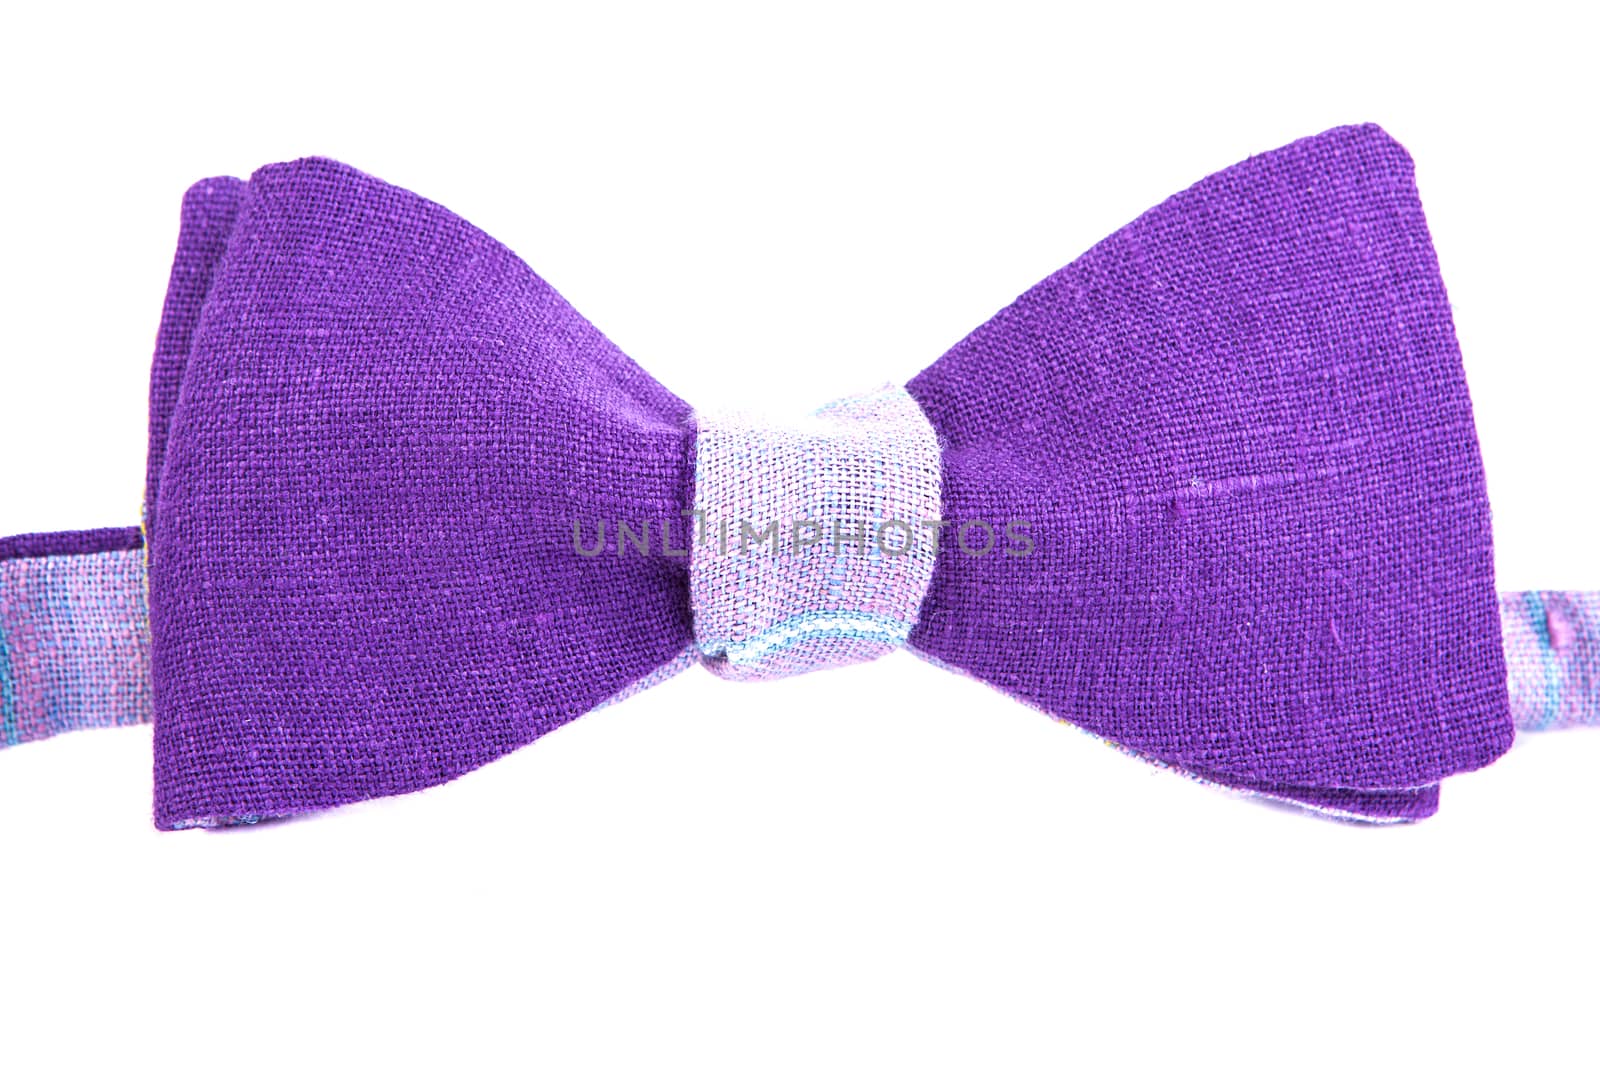 purple bow tie isolated on white background